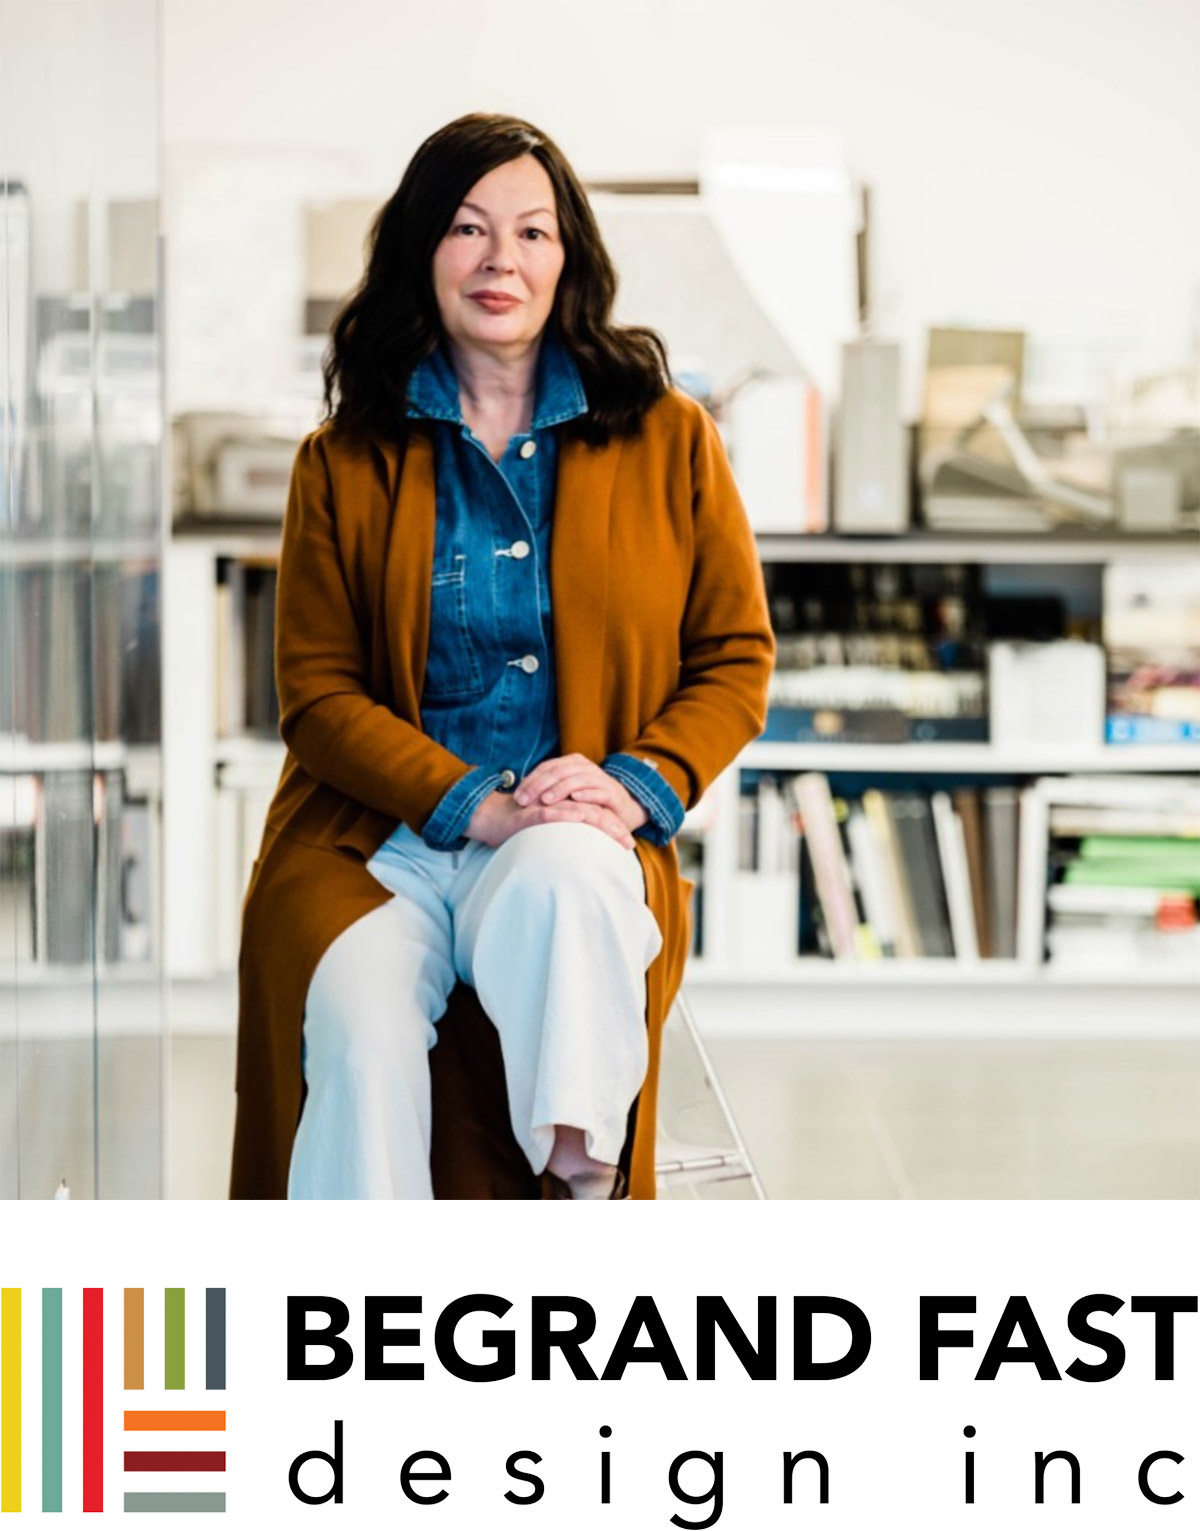 Nicole Begrand-Fast shares Fall Design insights with Jane Hoffman Realty